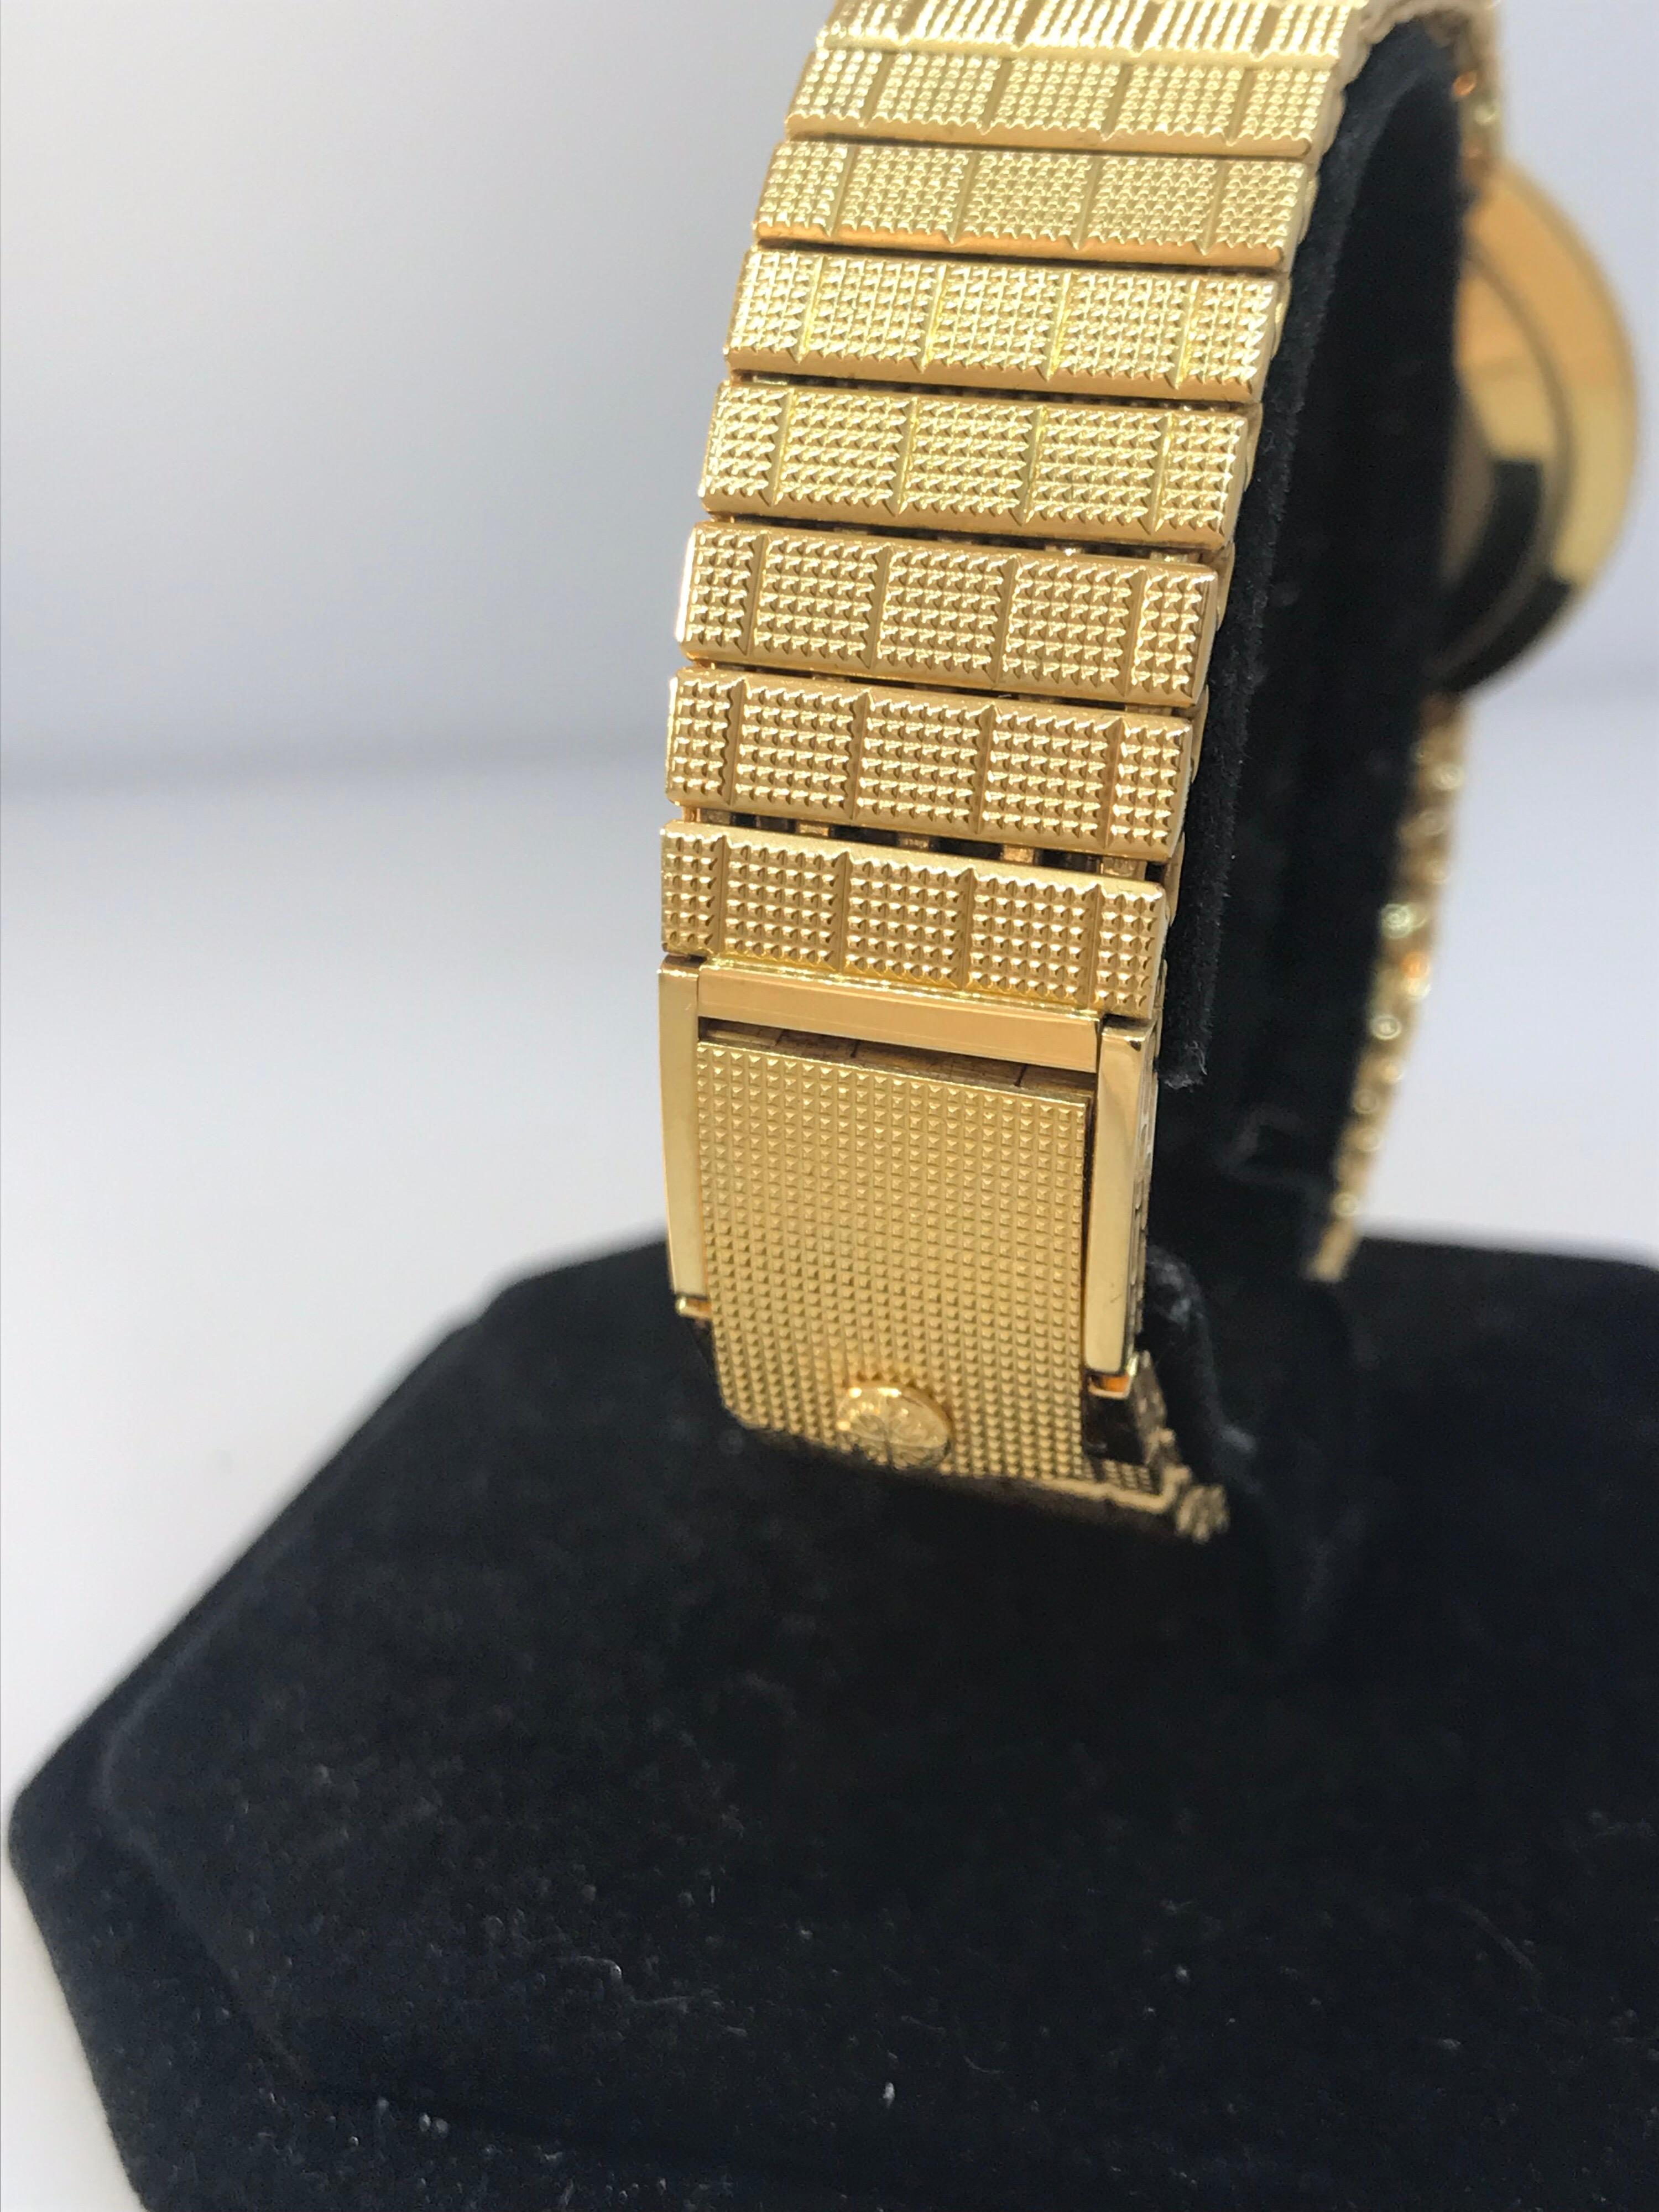 Patek Philippe Calatrava Yellow Gold Mechanical Men's Bracelet Watch 3919/10 In Excellent Condition For Sale In New York, NY